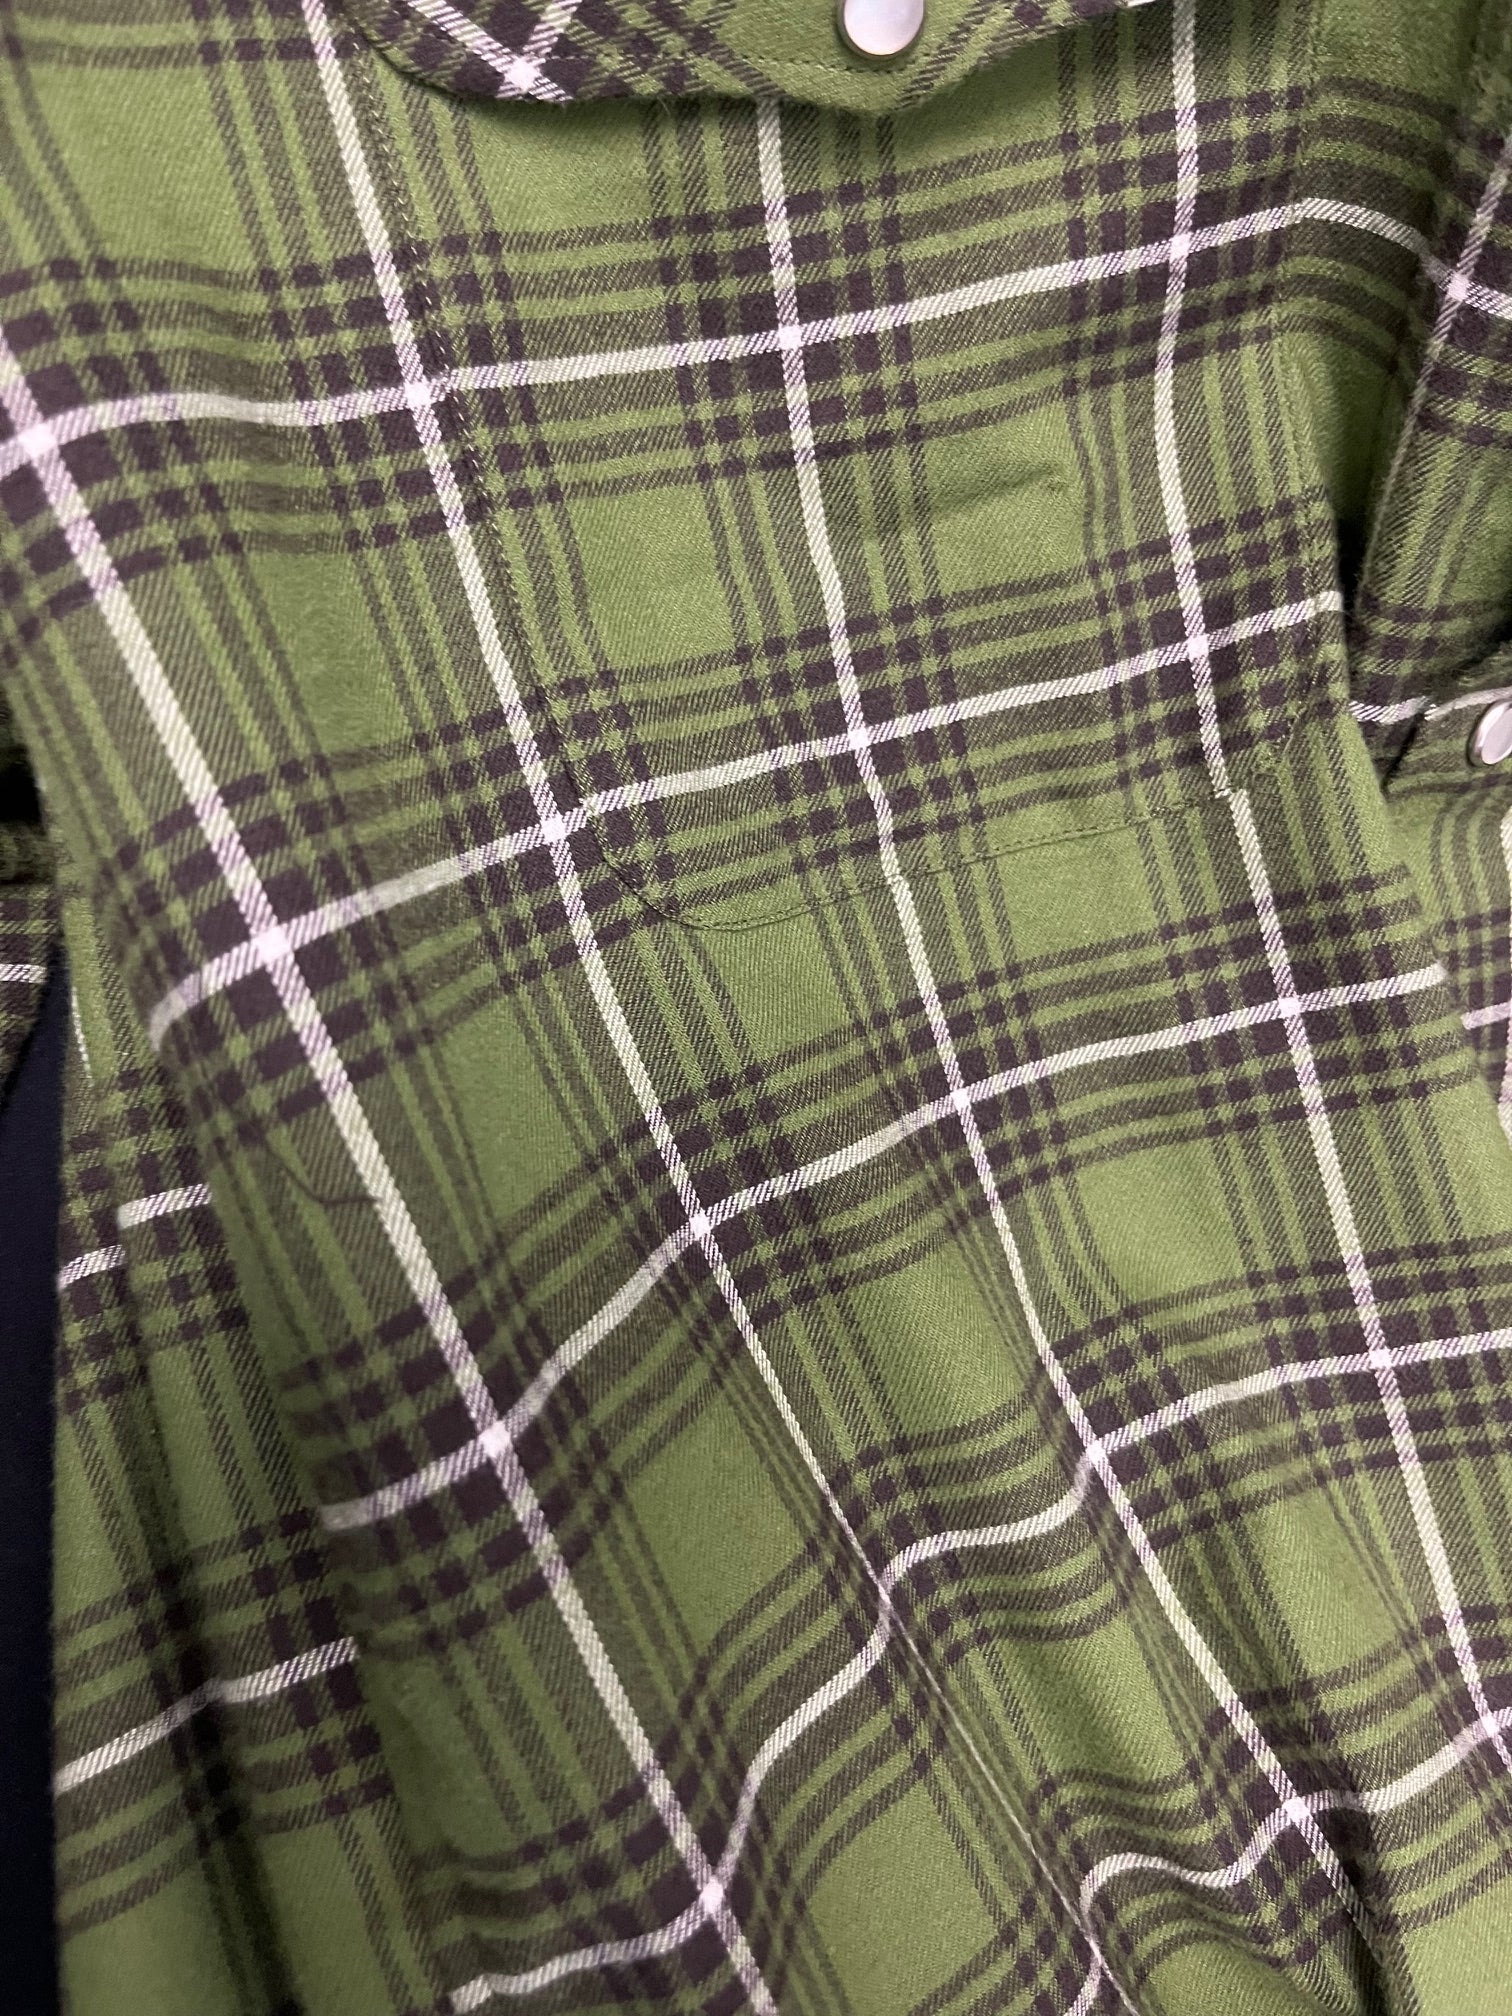 MTM JD Field Shirt Fanjul Sr. in Green/Brown Plaid with Patches